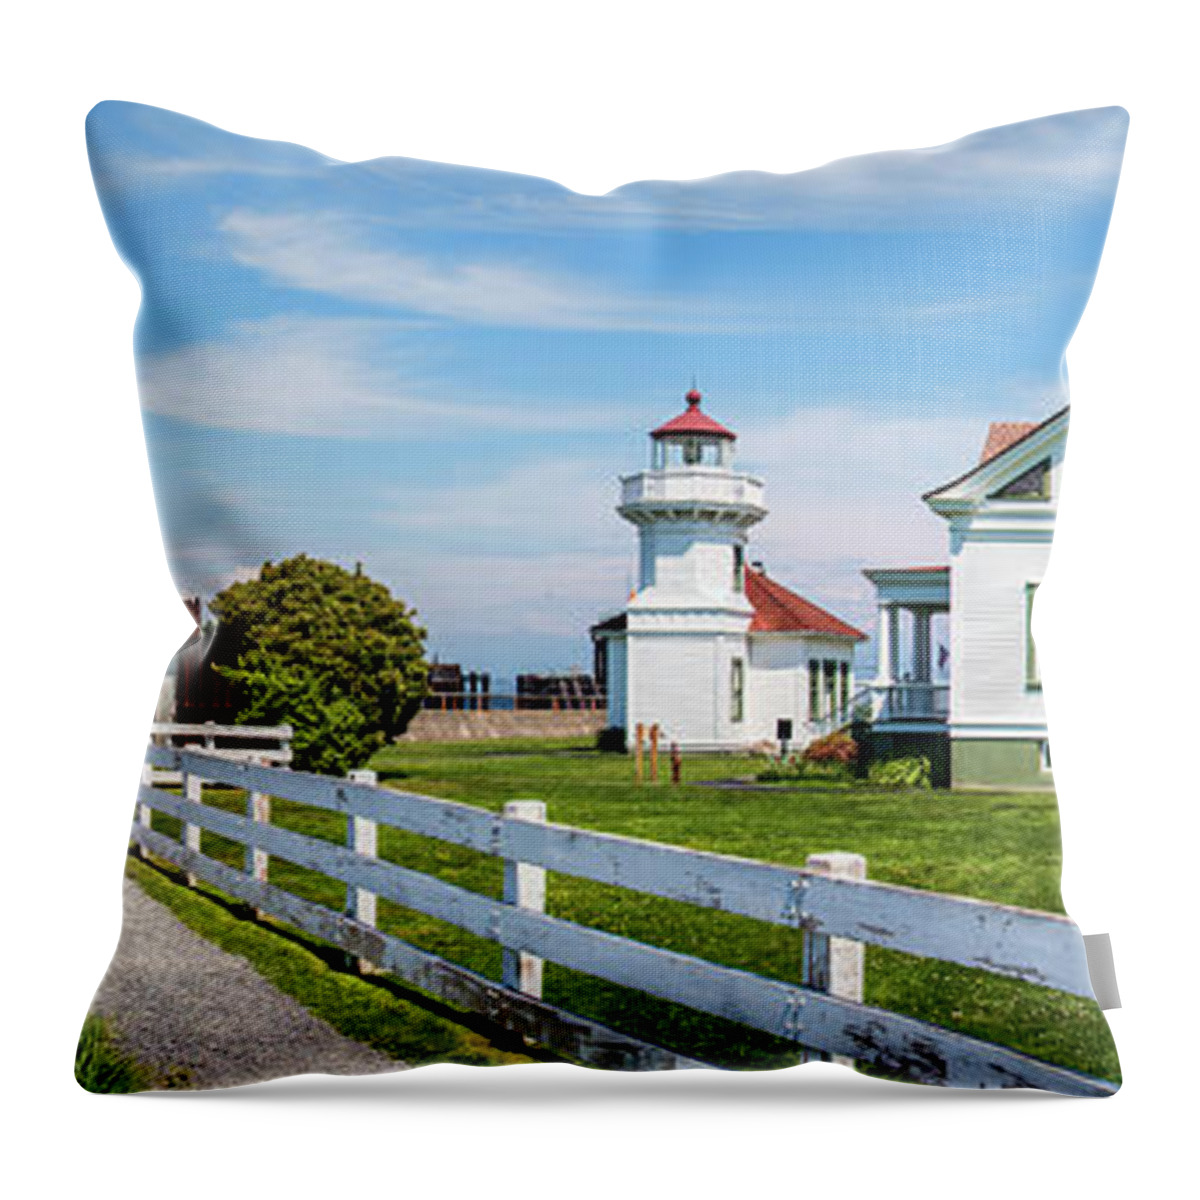 Photography Throw Pillow featuring the photograph Lighthouse With Ferry by Panoramic Images